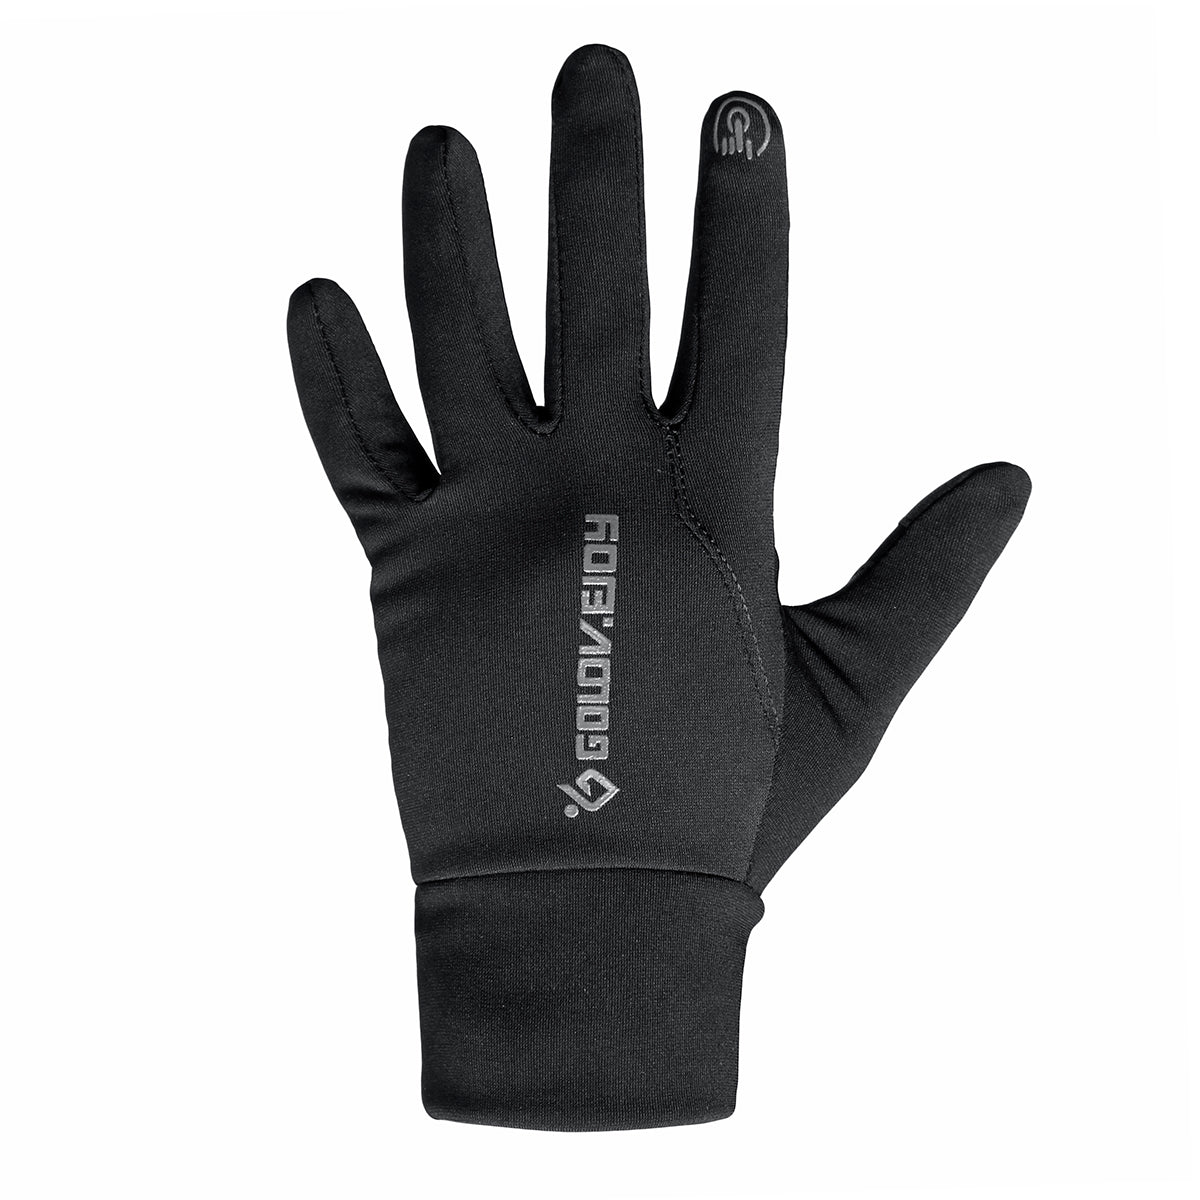 Dark Slate Gray Motocycle Touch Screen Winter Gloves Thermal Warm Velvet Lined Anti Skid Racing Cycling